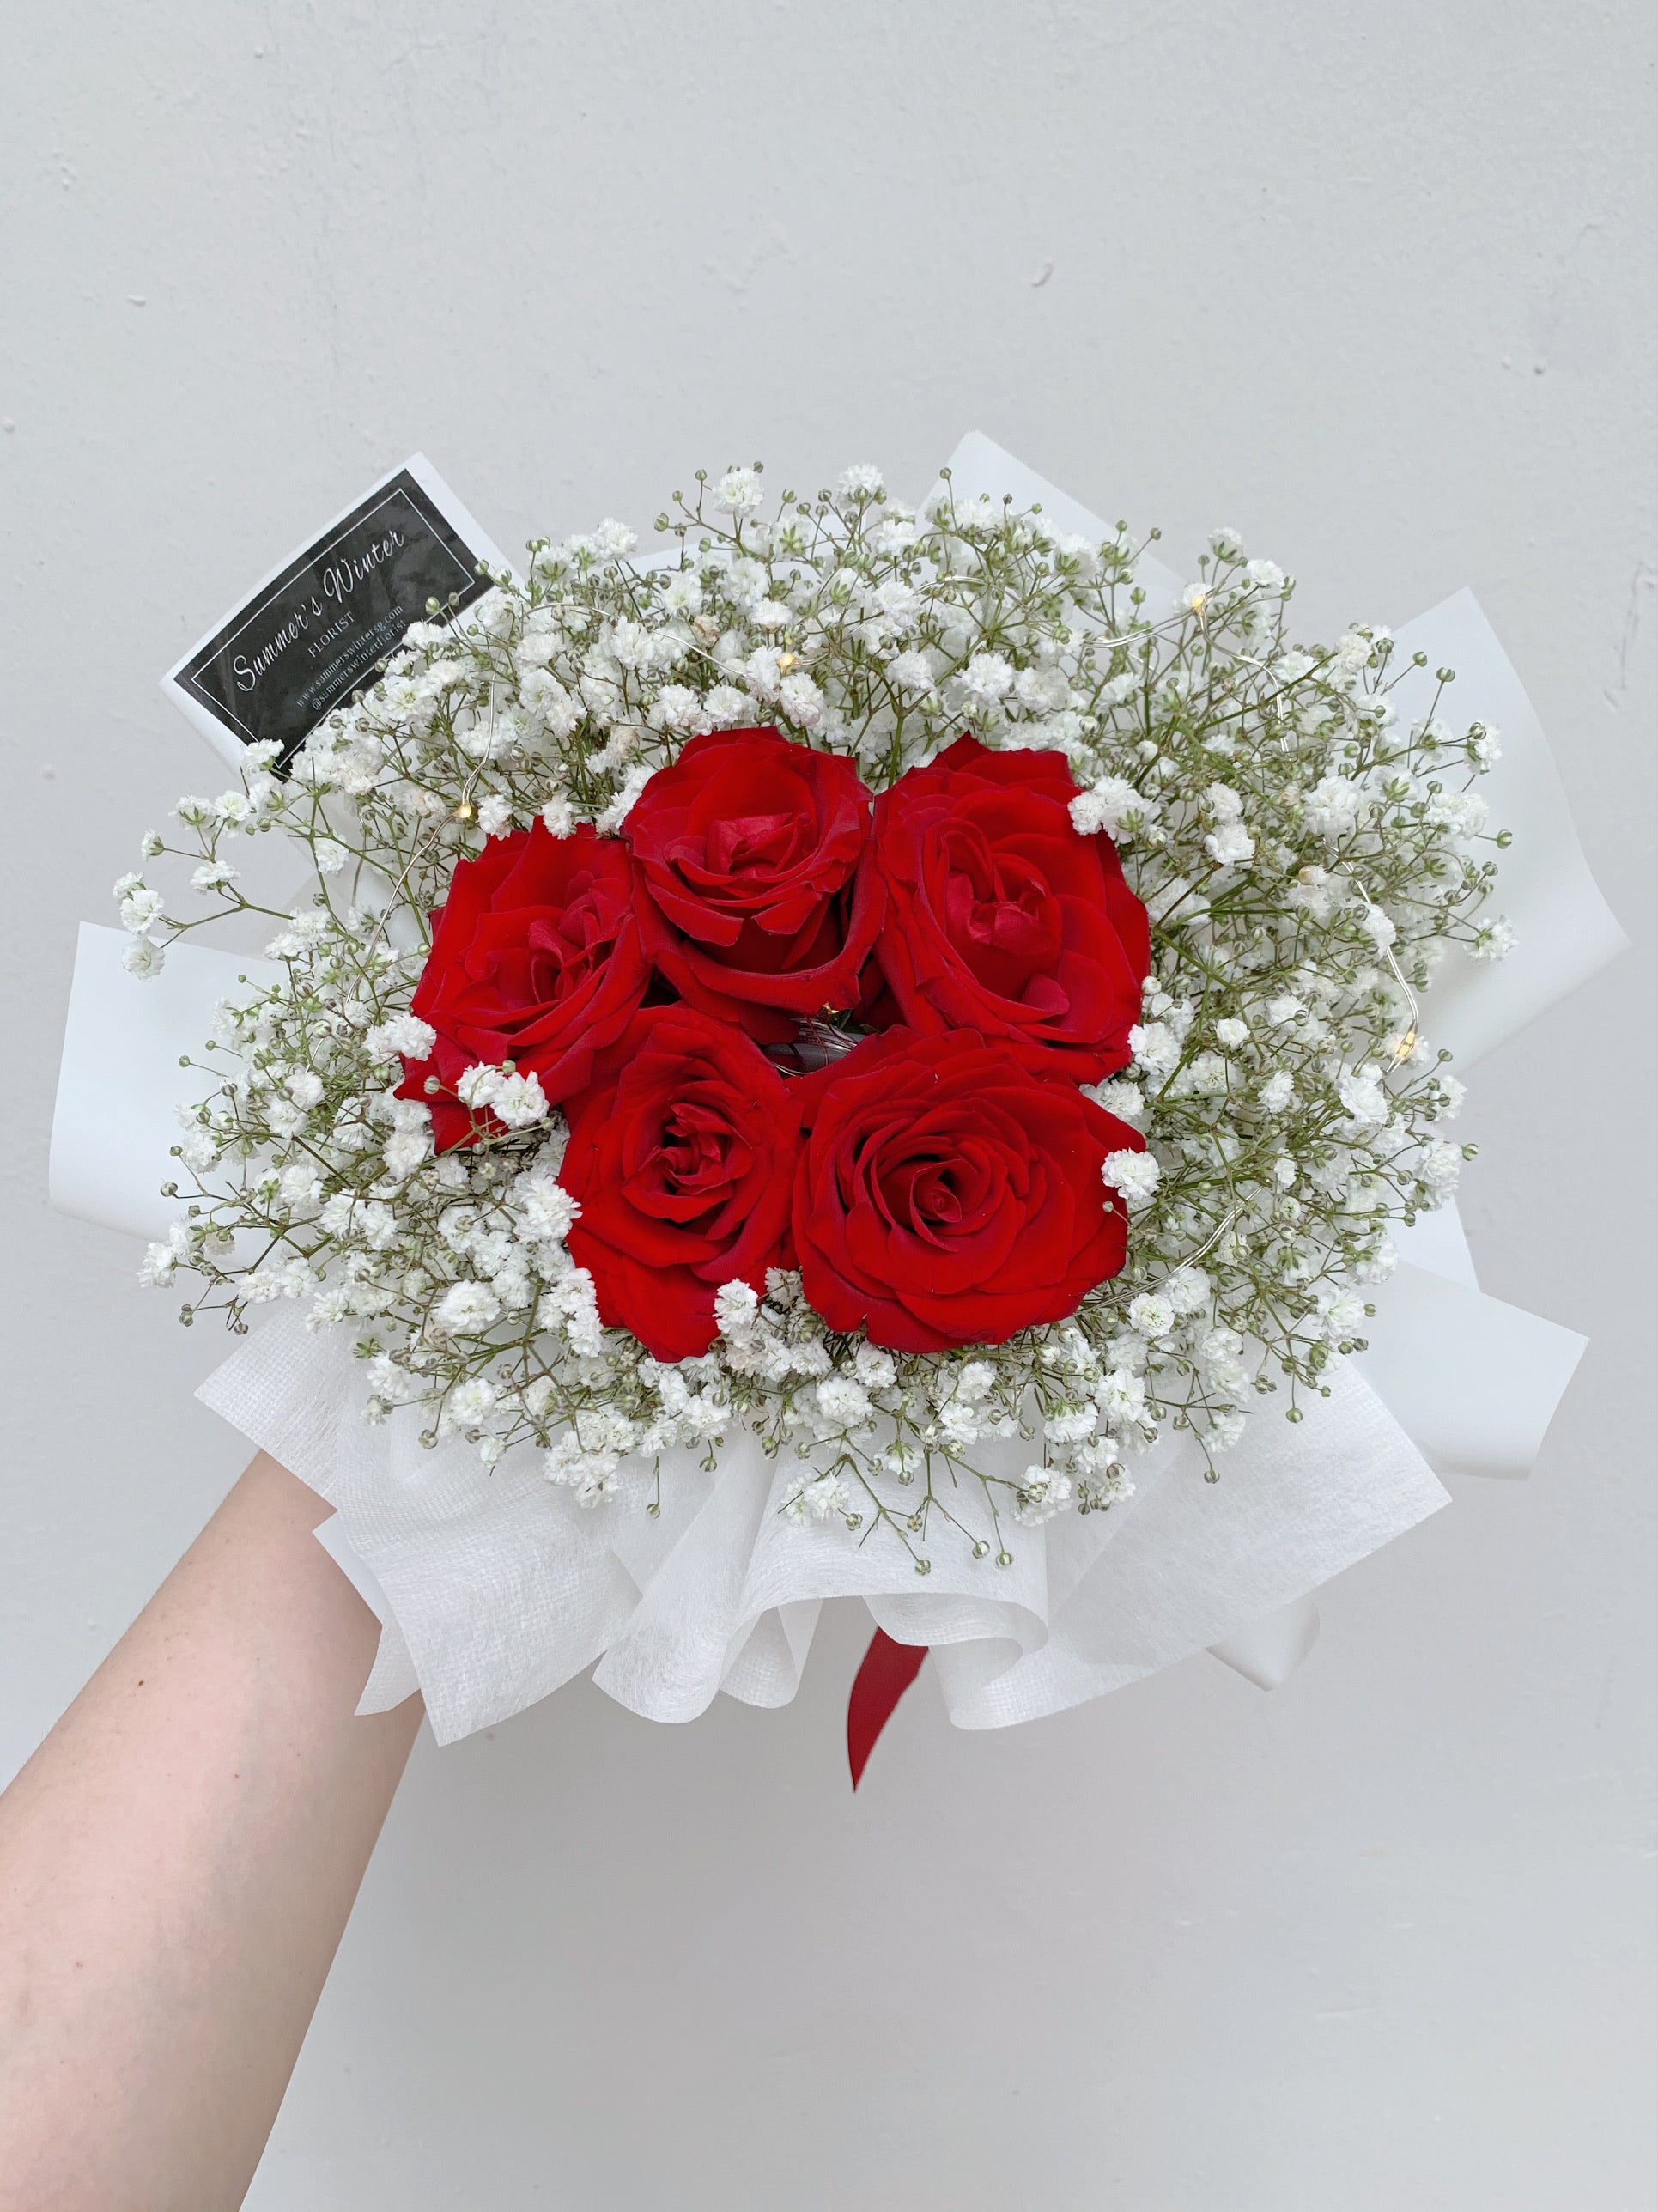 Fresh Baby Breath and Fresh Red Roses with white wrapping paper